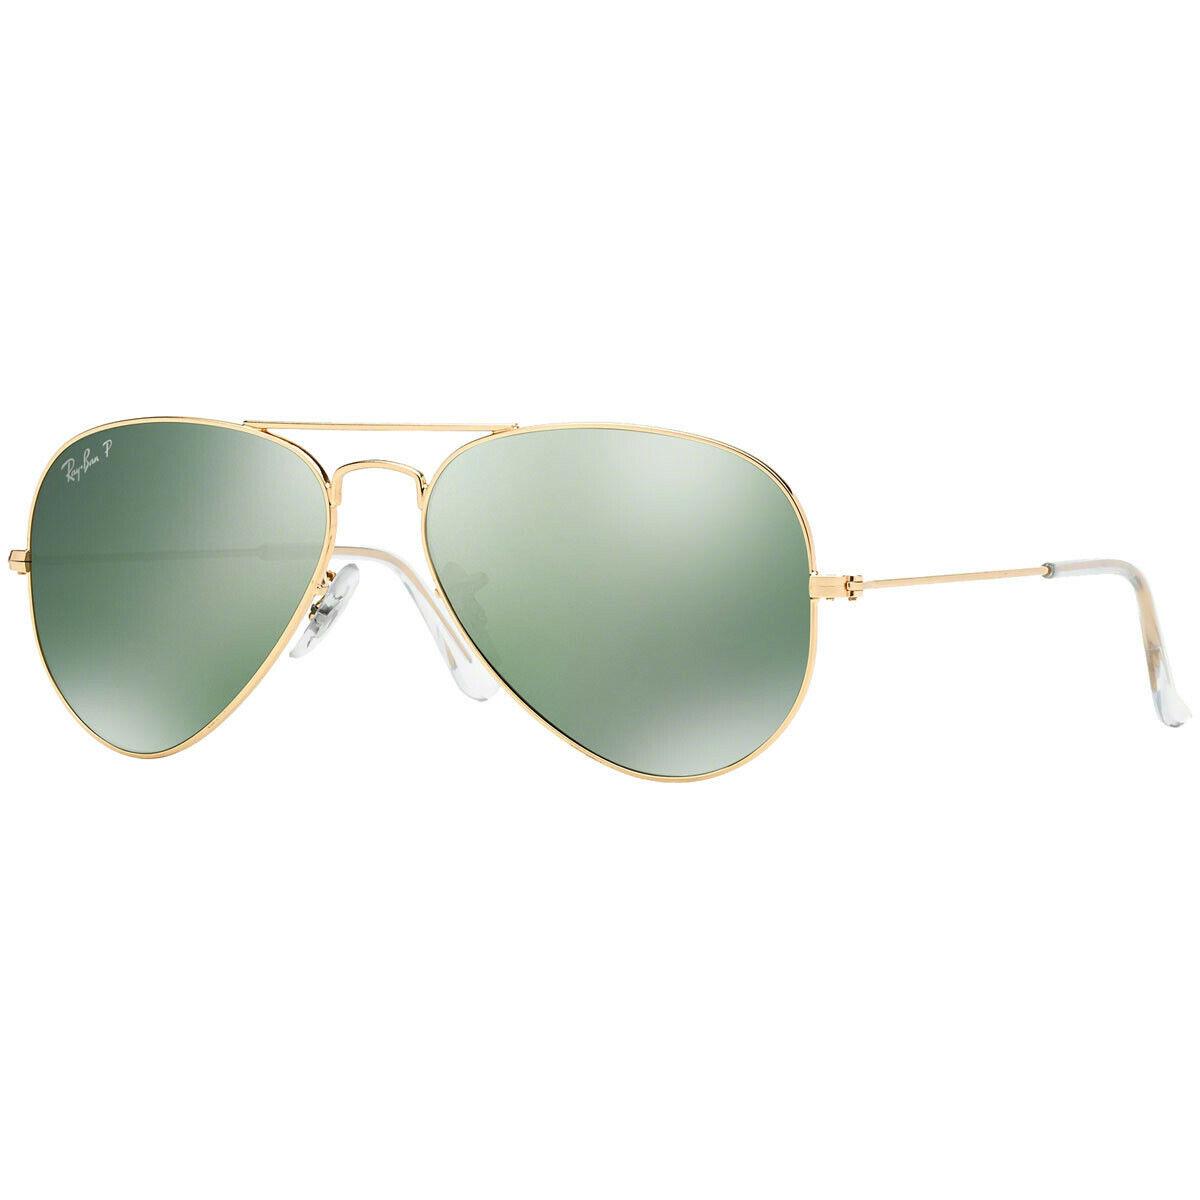 Ray-ban Sunglasses Aviator RB3025 001/M4 58mm Gold Green Silver Mirror Polarized - Gold Frame, Green Mirrored Lens